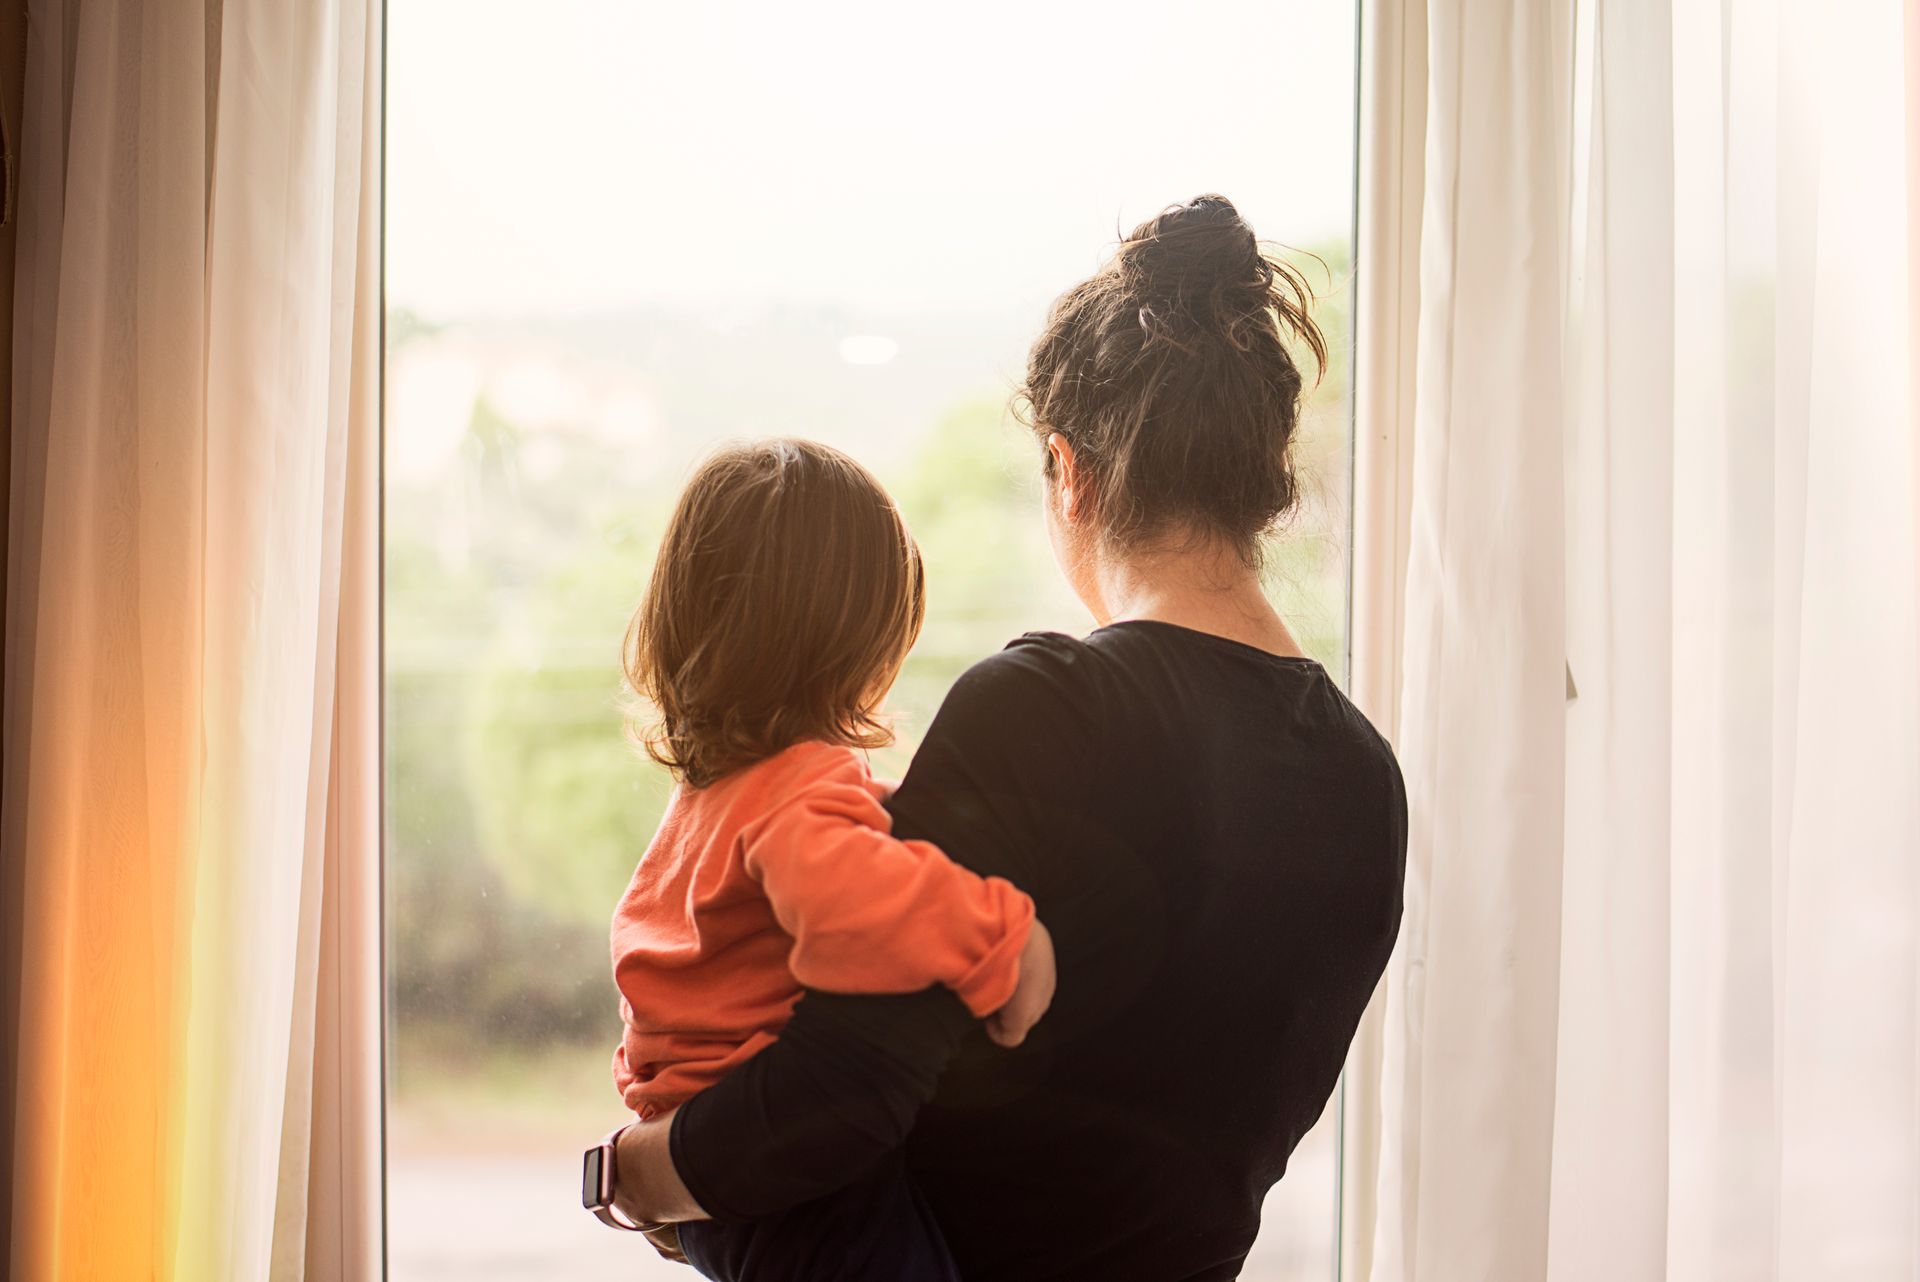 A woman is holding a child and looking out of a window.